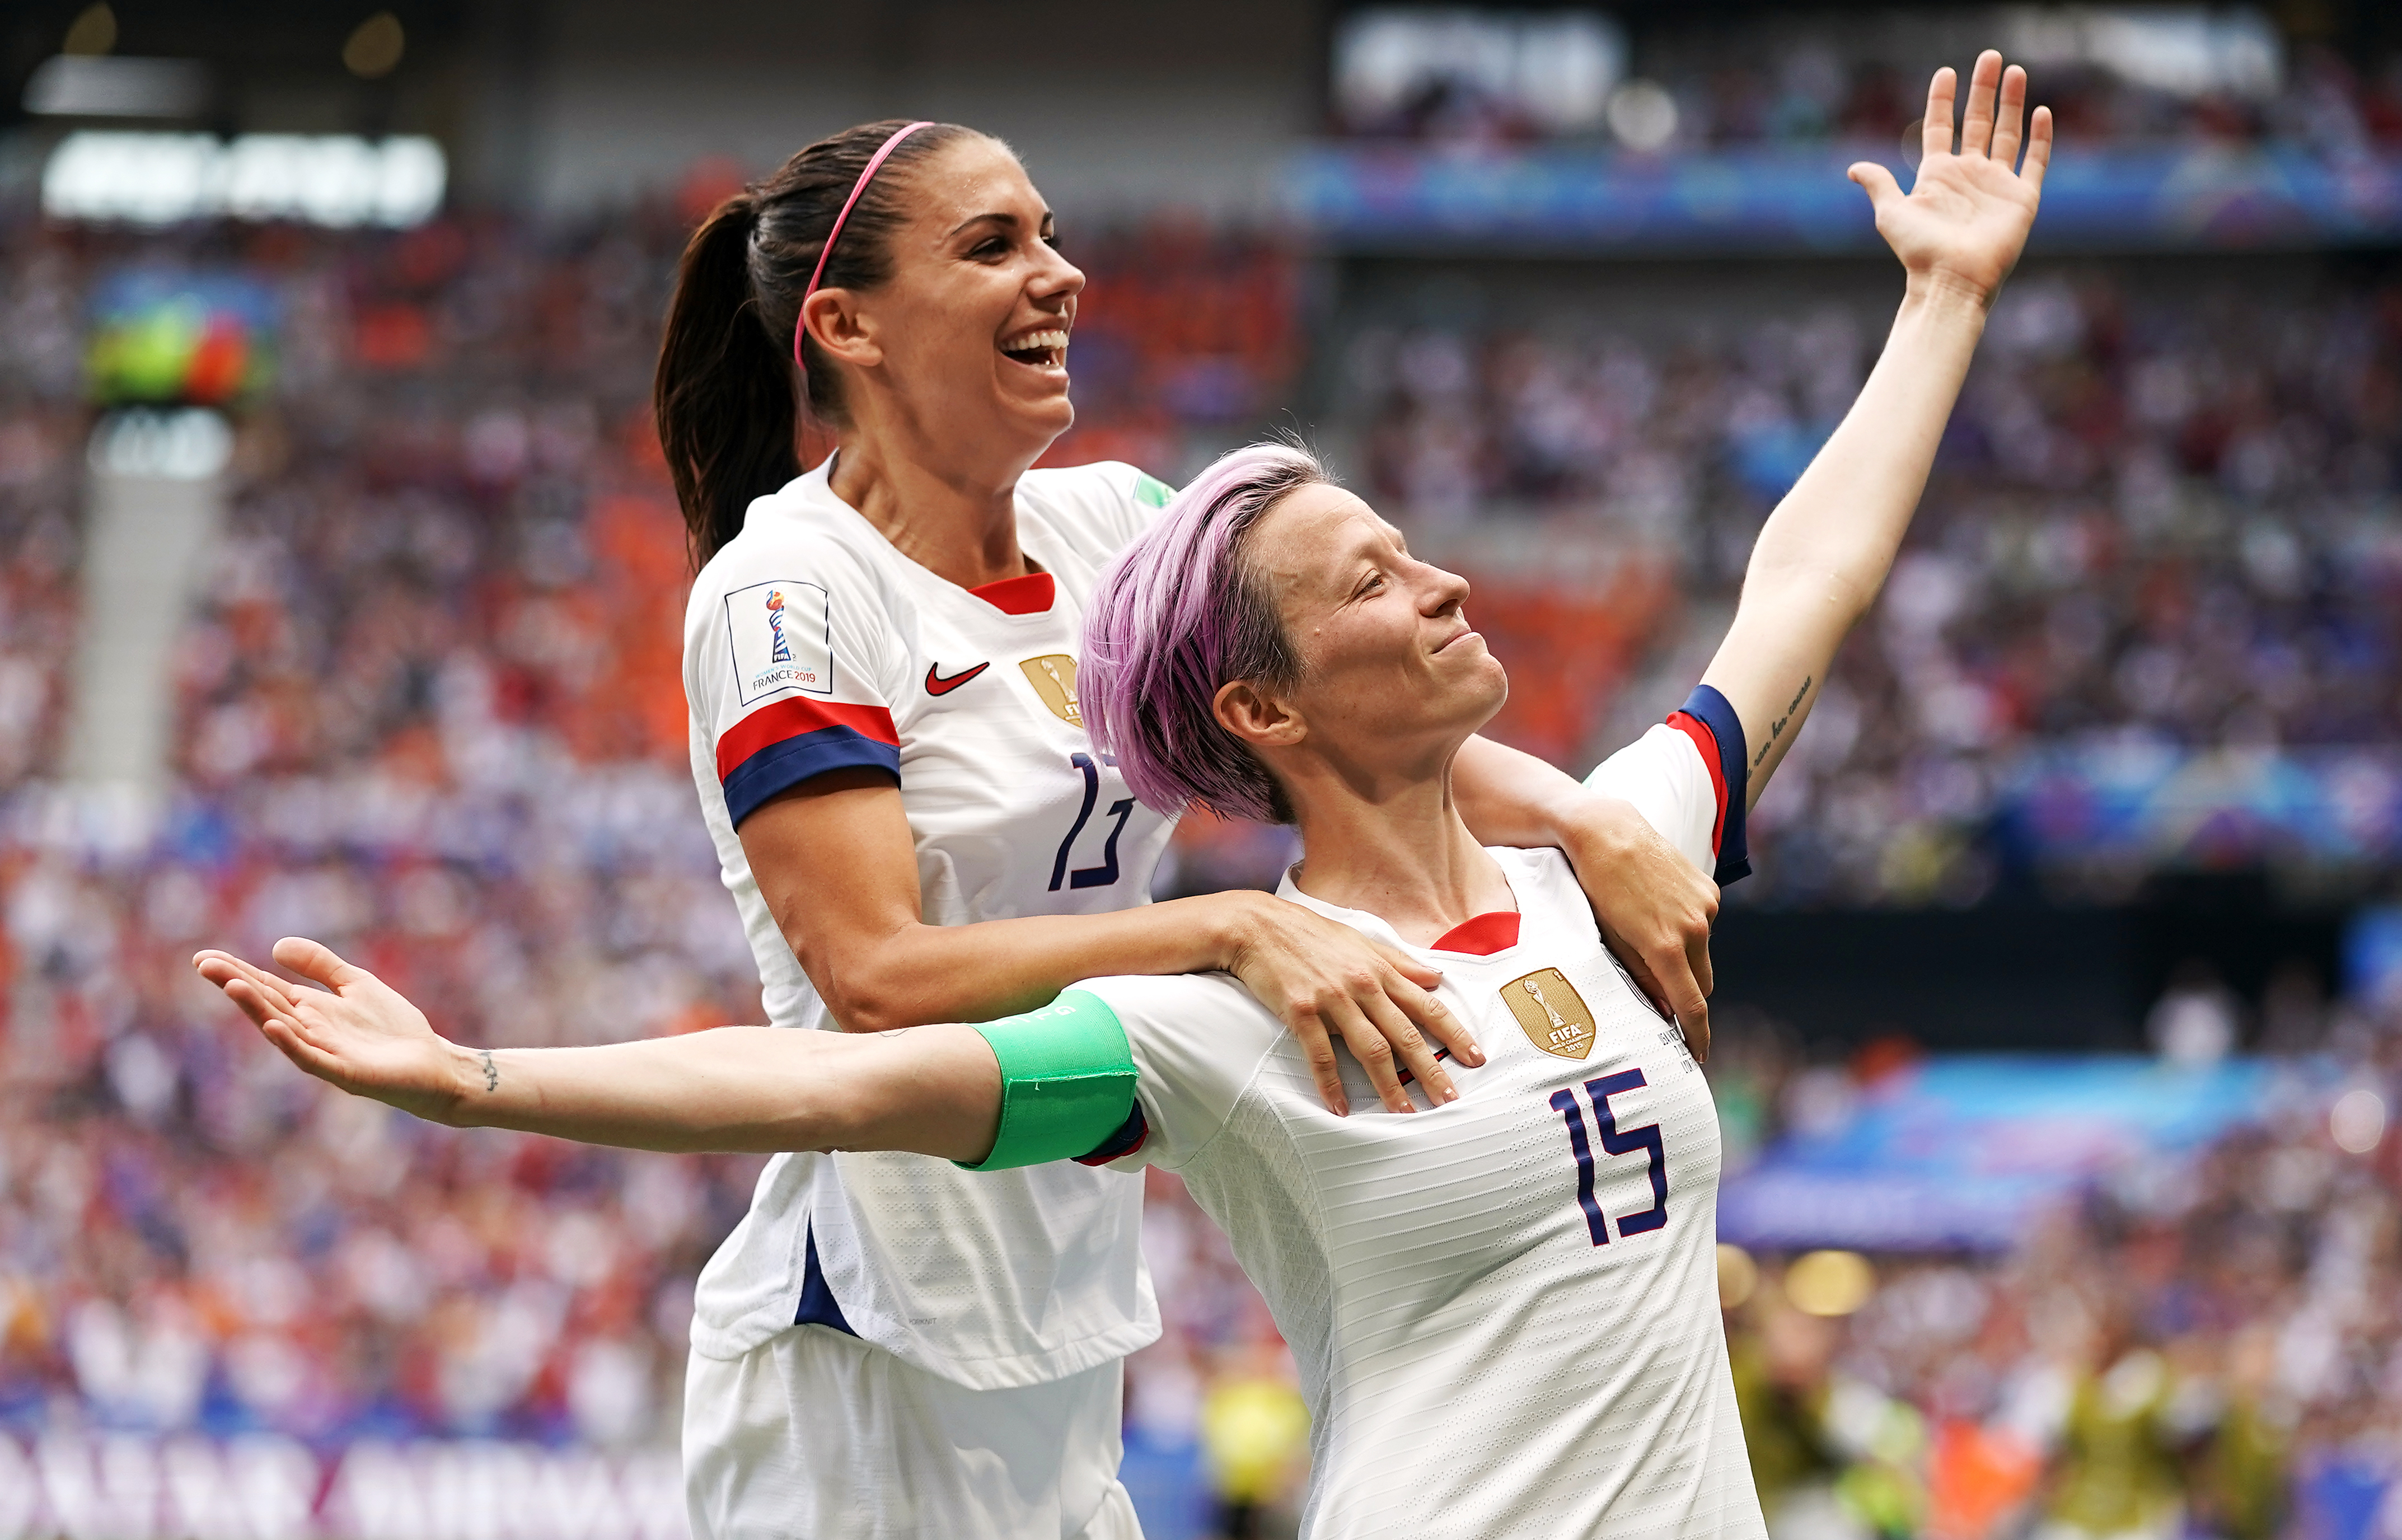 World Cup golden ball winner Megan Rapinoe, right, celebrates with Alex Morgan scoring the opening goal during the women's World Cup final. The United States won the competition for the fourth time following a 2-0 victory over the Netherlands in Lyon. Veteran winger Rapinoe and Morgan finished the tournament as joint top scorers, alongside England's Ellen White, with six goals each